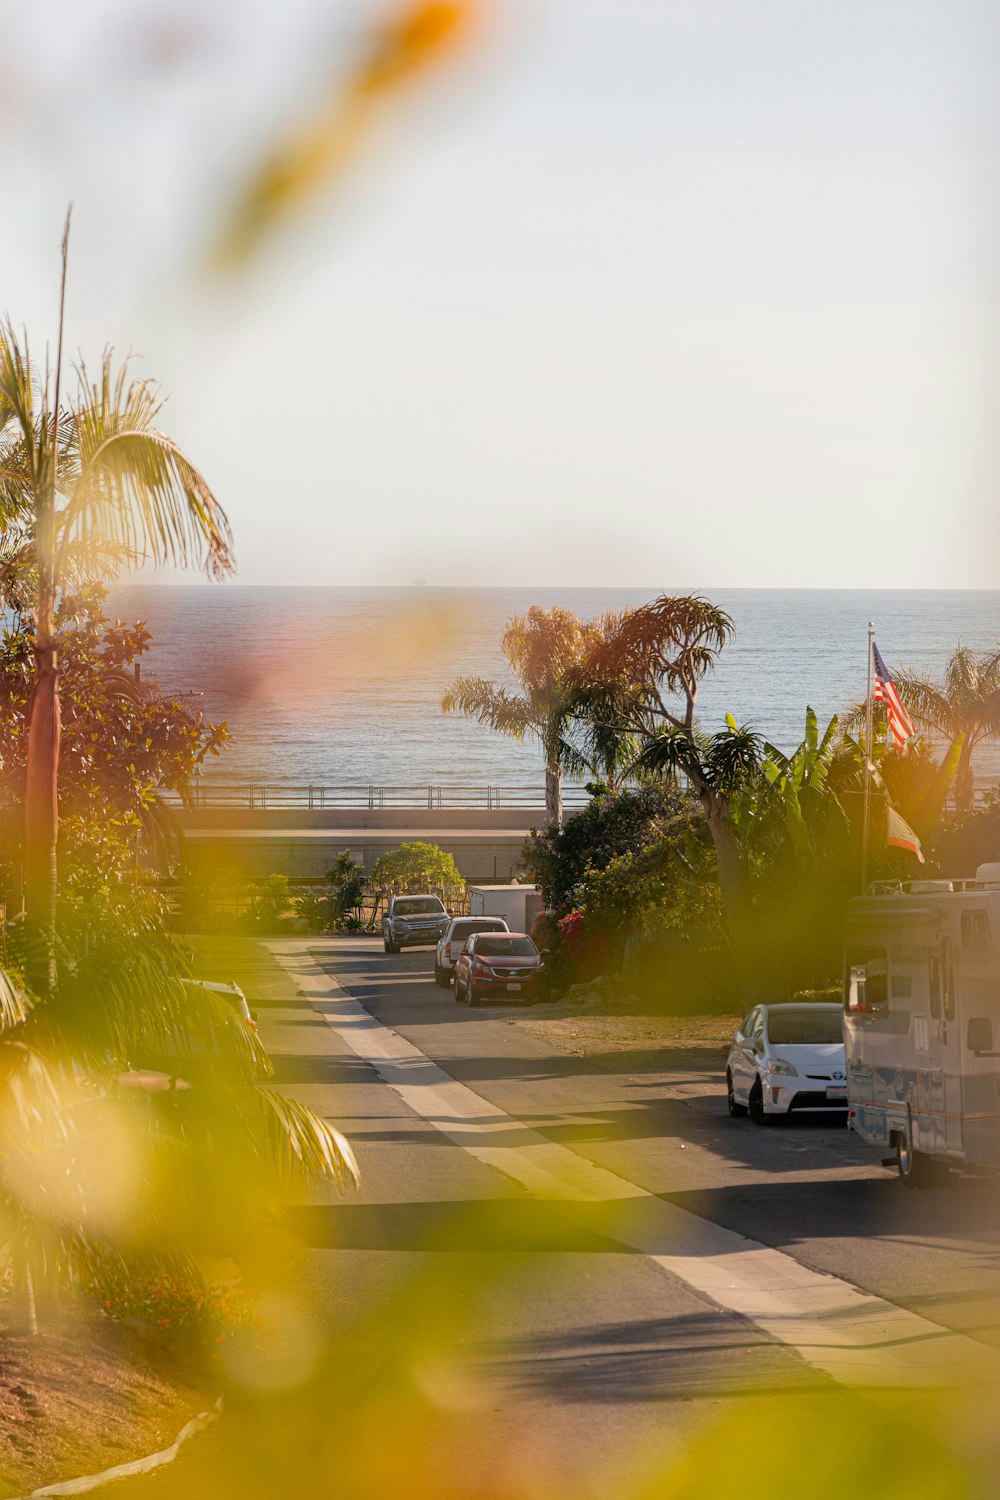 a view of a street with cars and a beach in the background